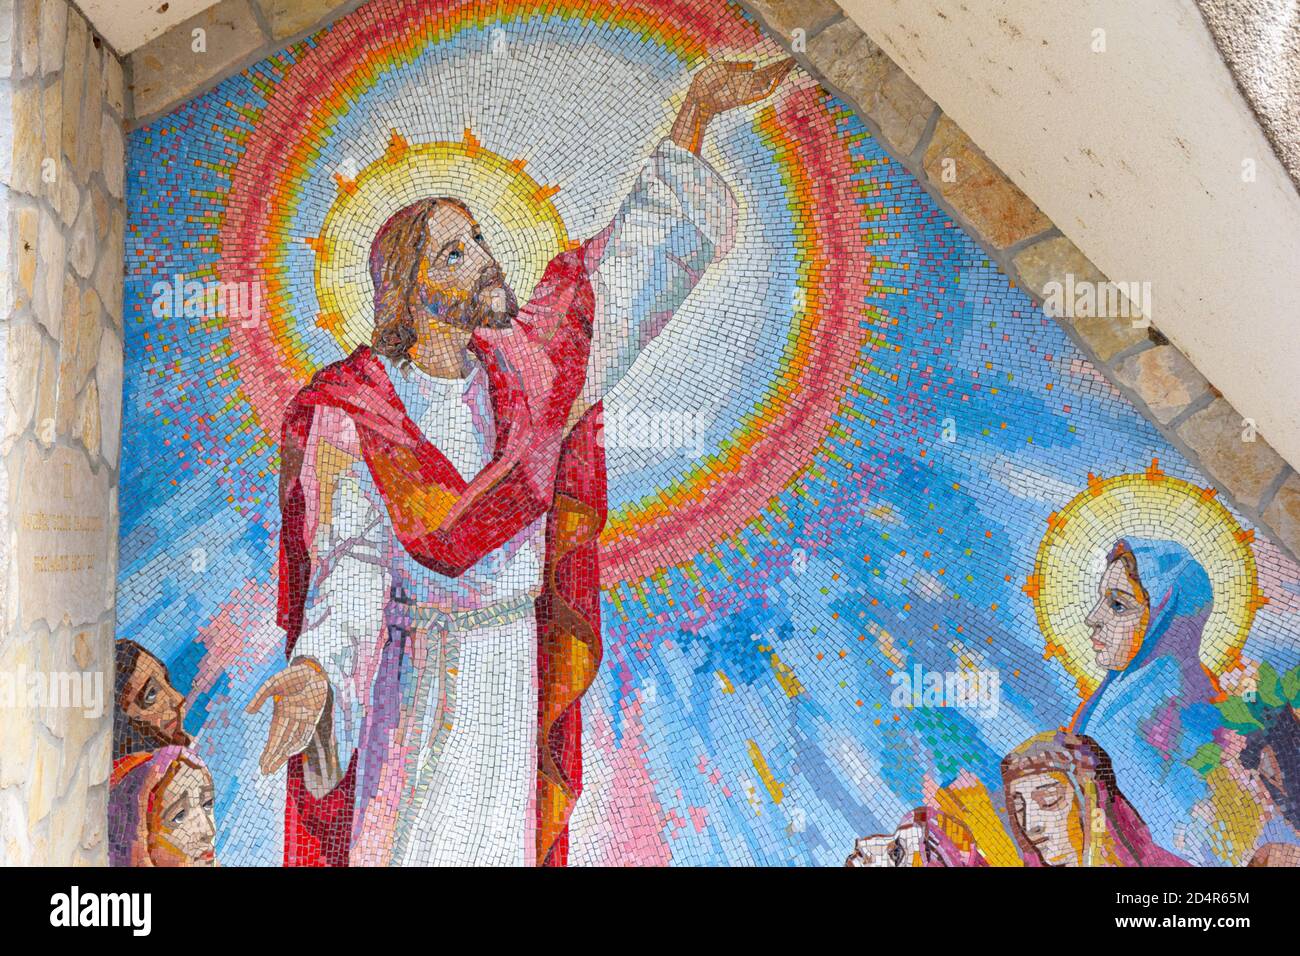 Medjugorje, BiH. 2016/6/5. Mosaic of the Proclamation of the Kingdom of God and the call to conversion as the Third Luminous Mystery of the Rosary. Stock Photo